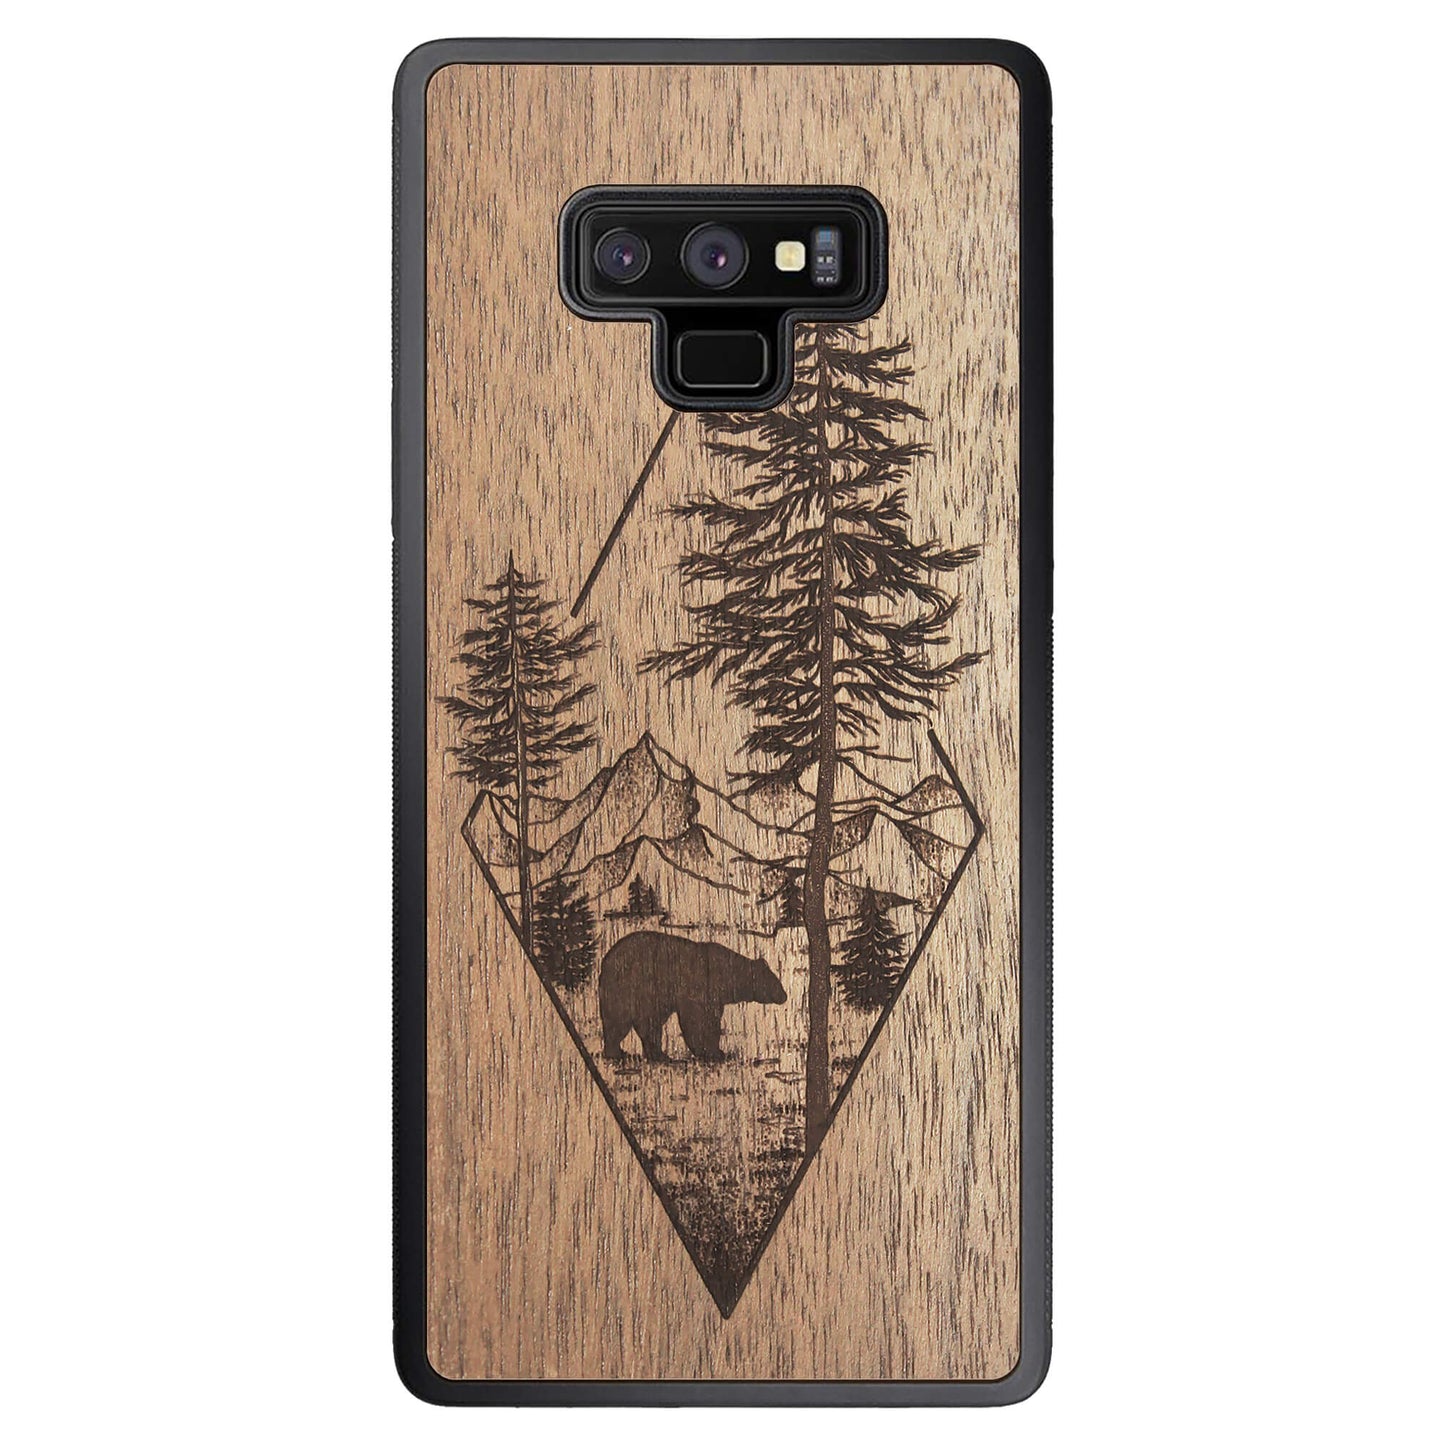 Wooden Case for Samsung Galaxy Note 9 Woodland